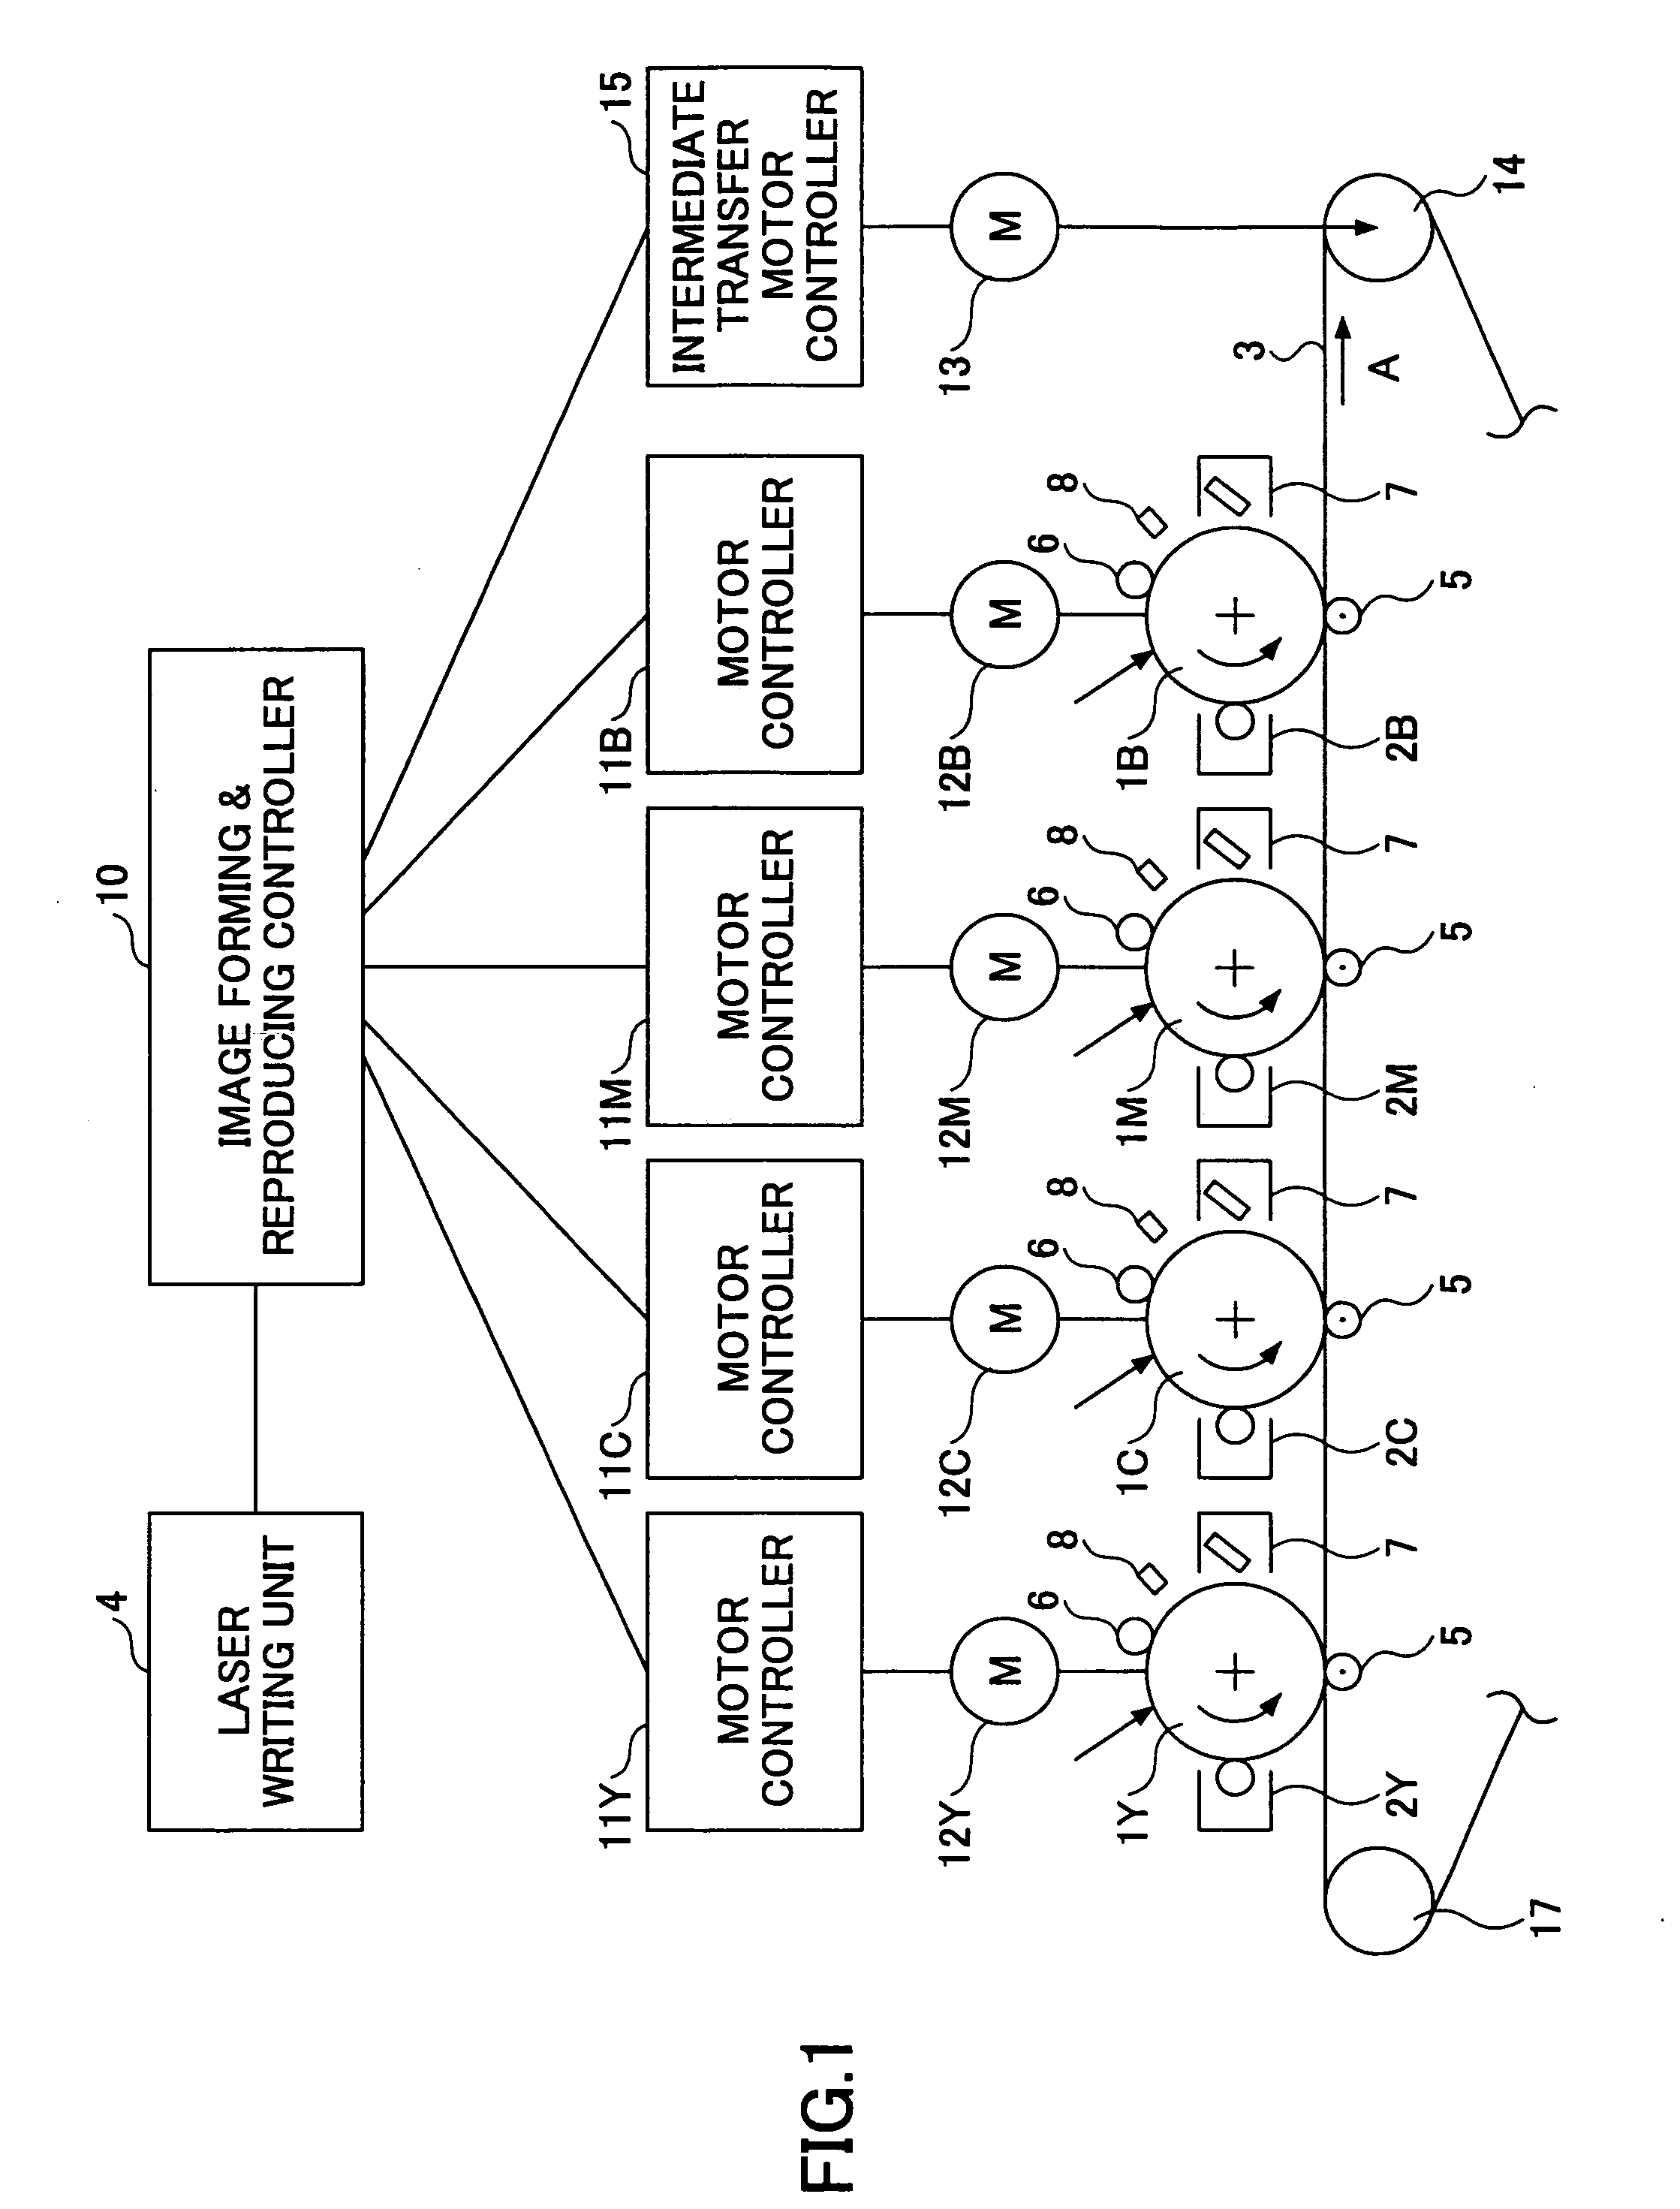 Image forming and reproducing apparatus, and image transferring method